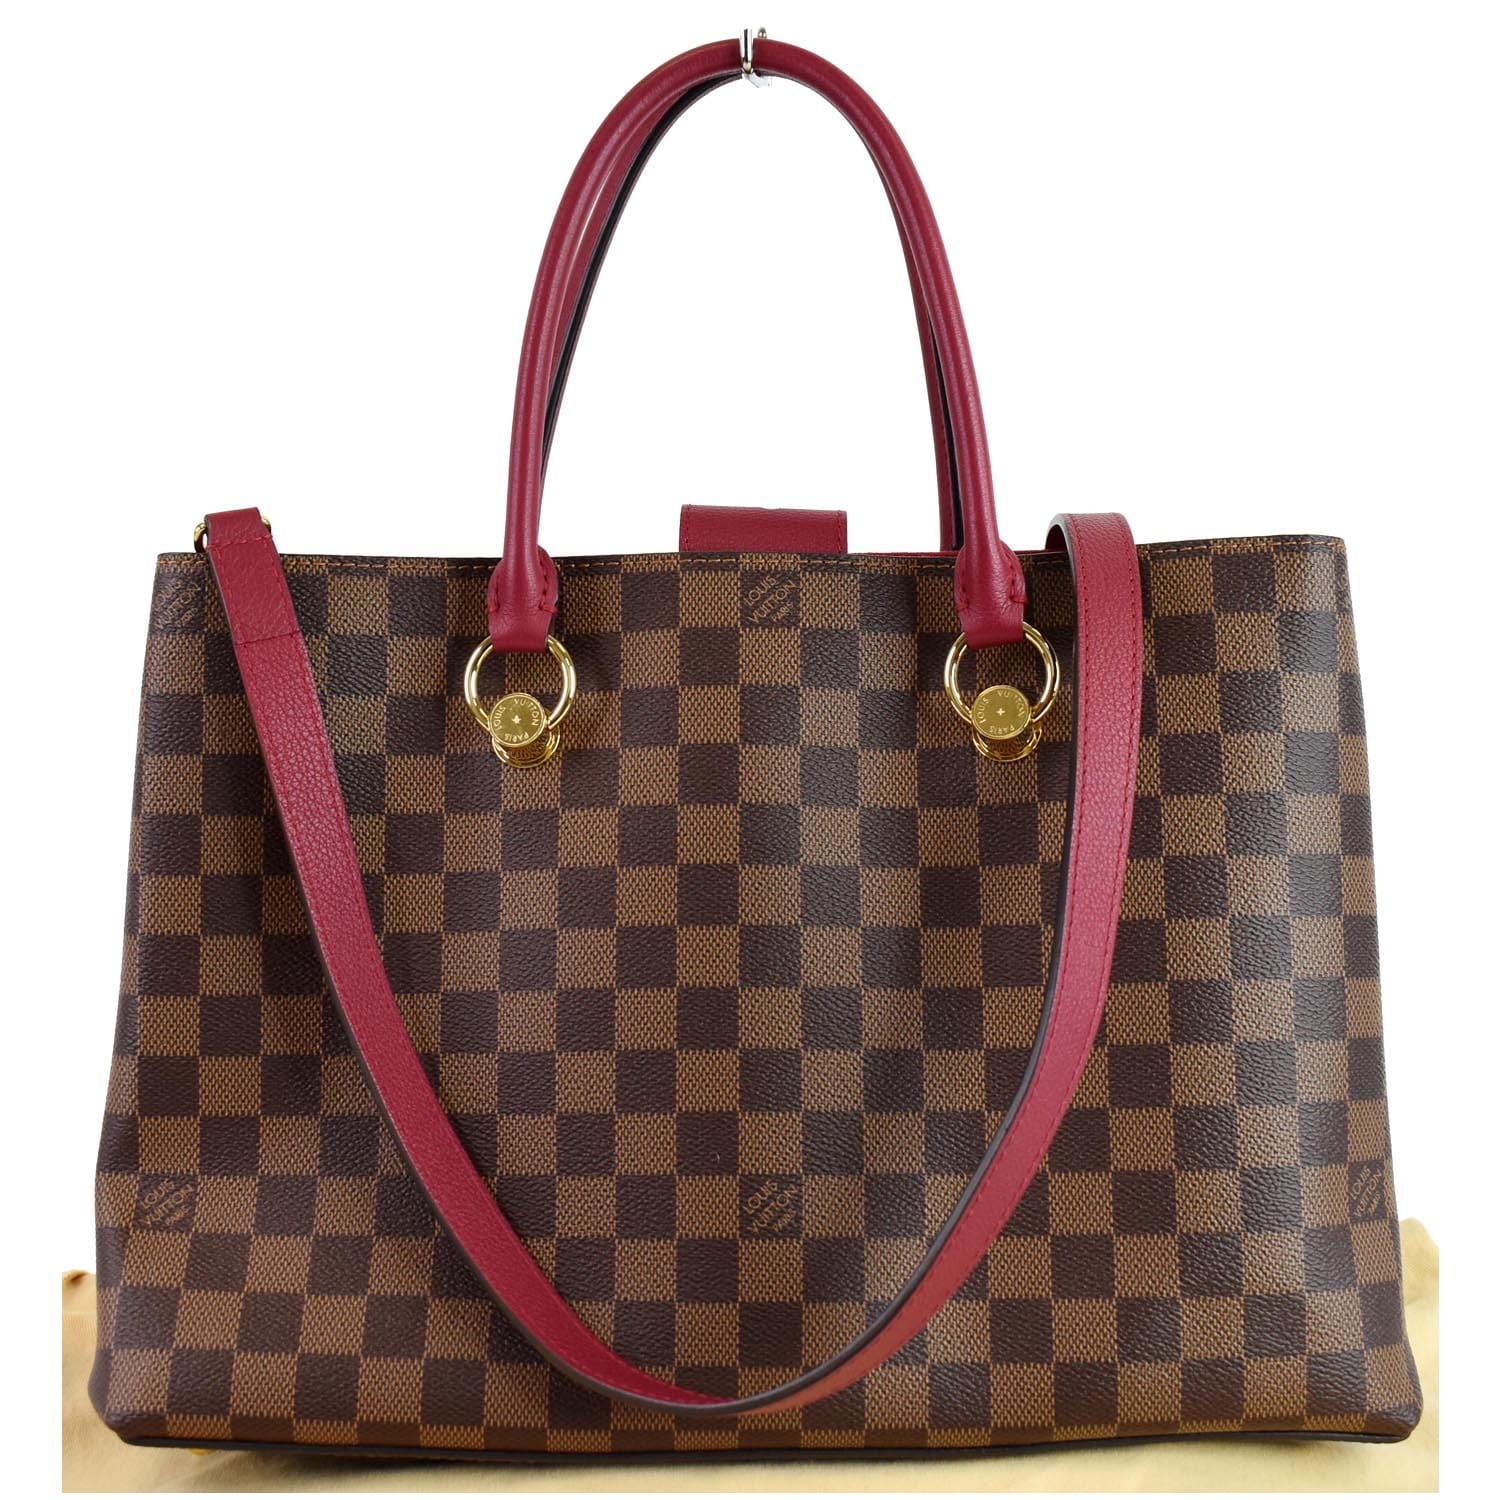 Louis Vuitton Riverside bag! It's on our website or come in and